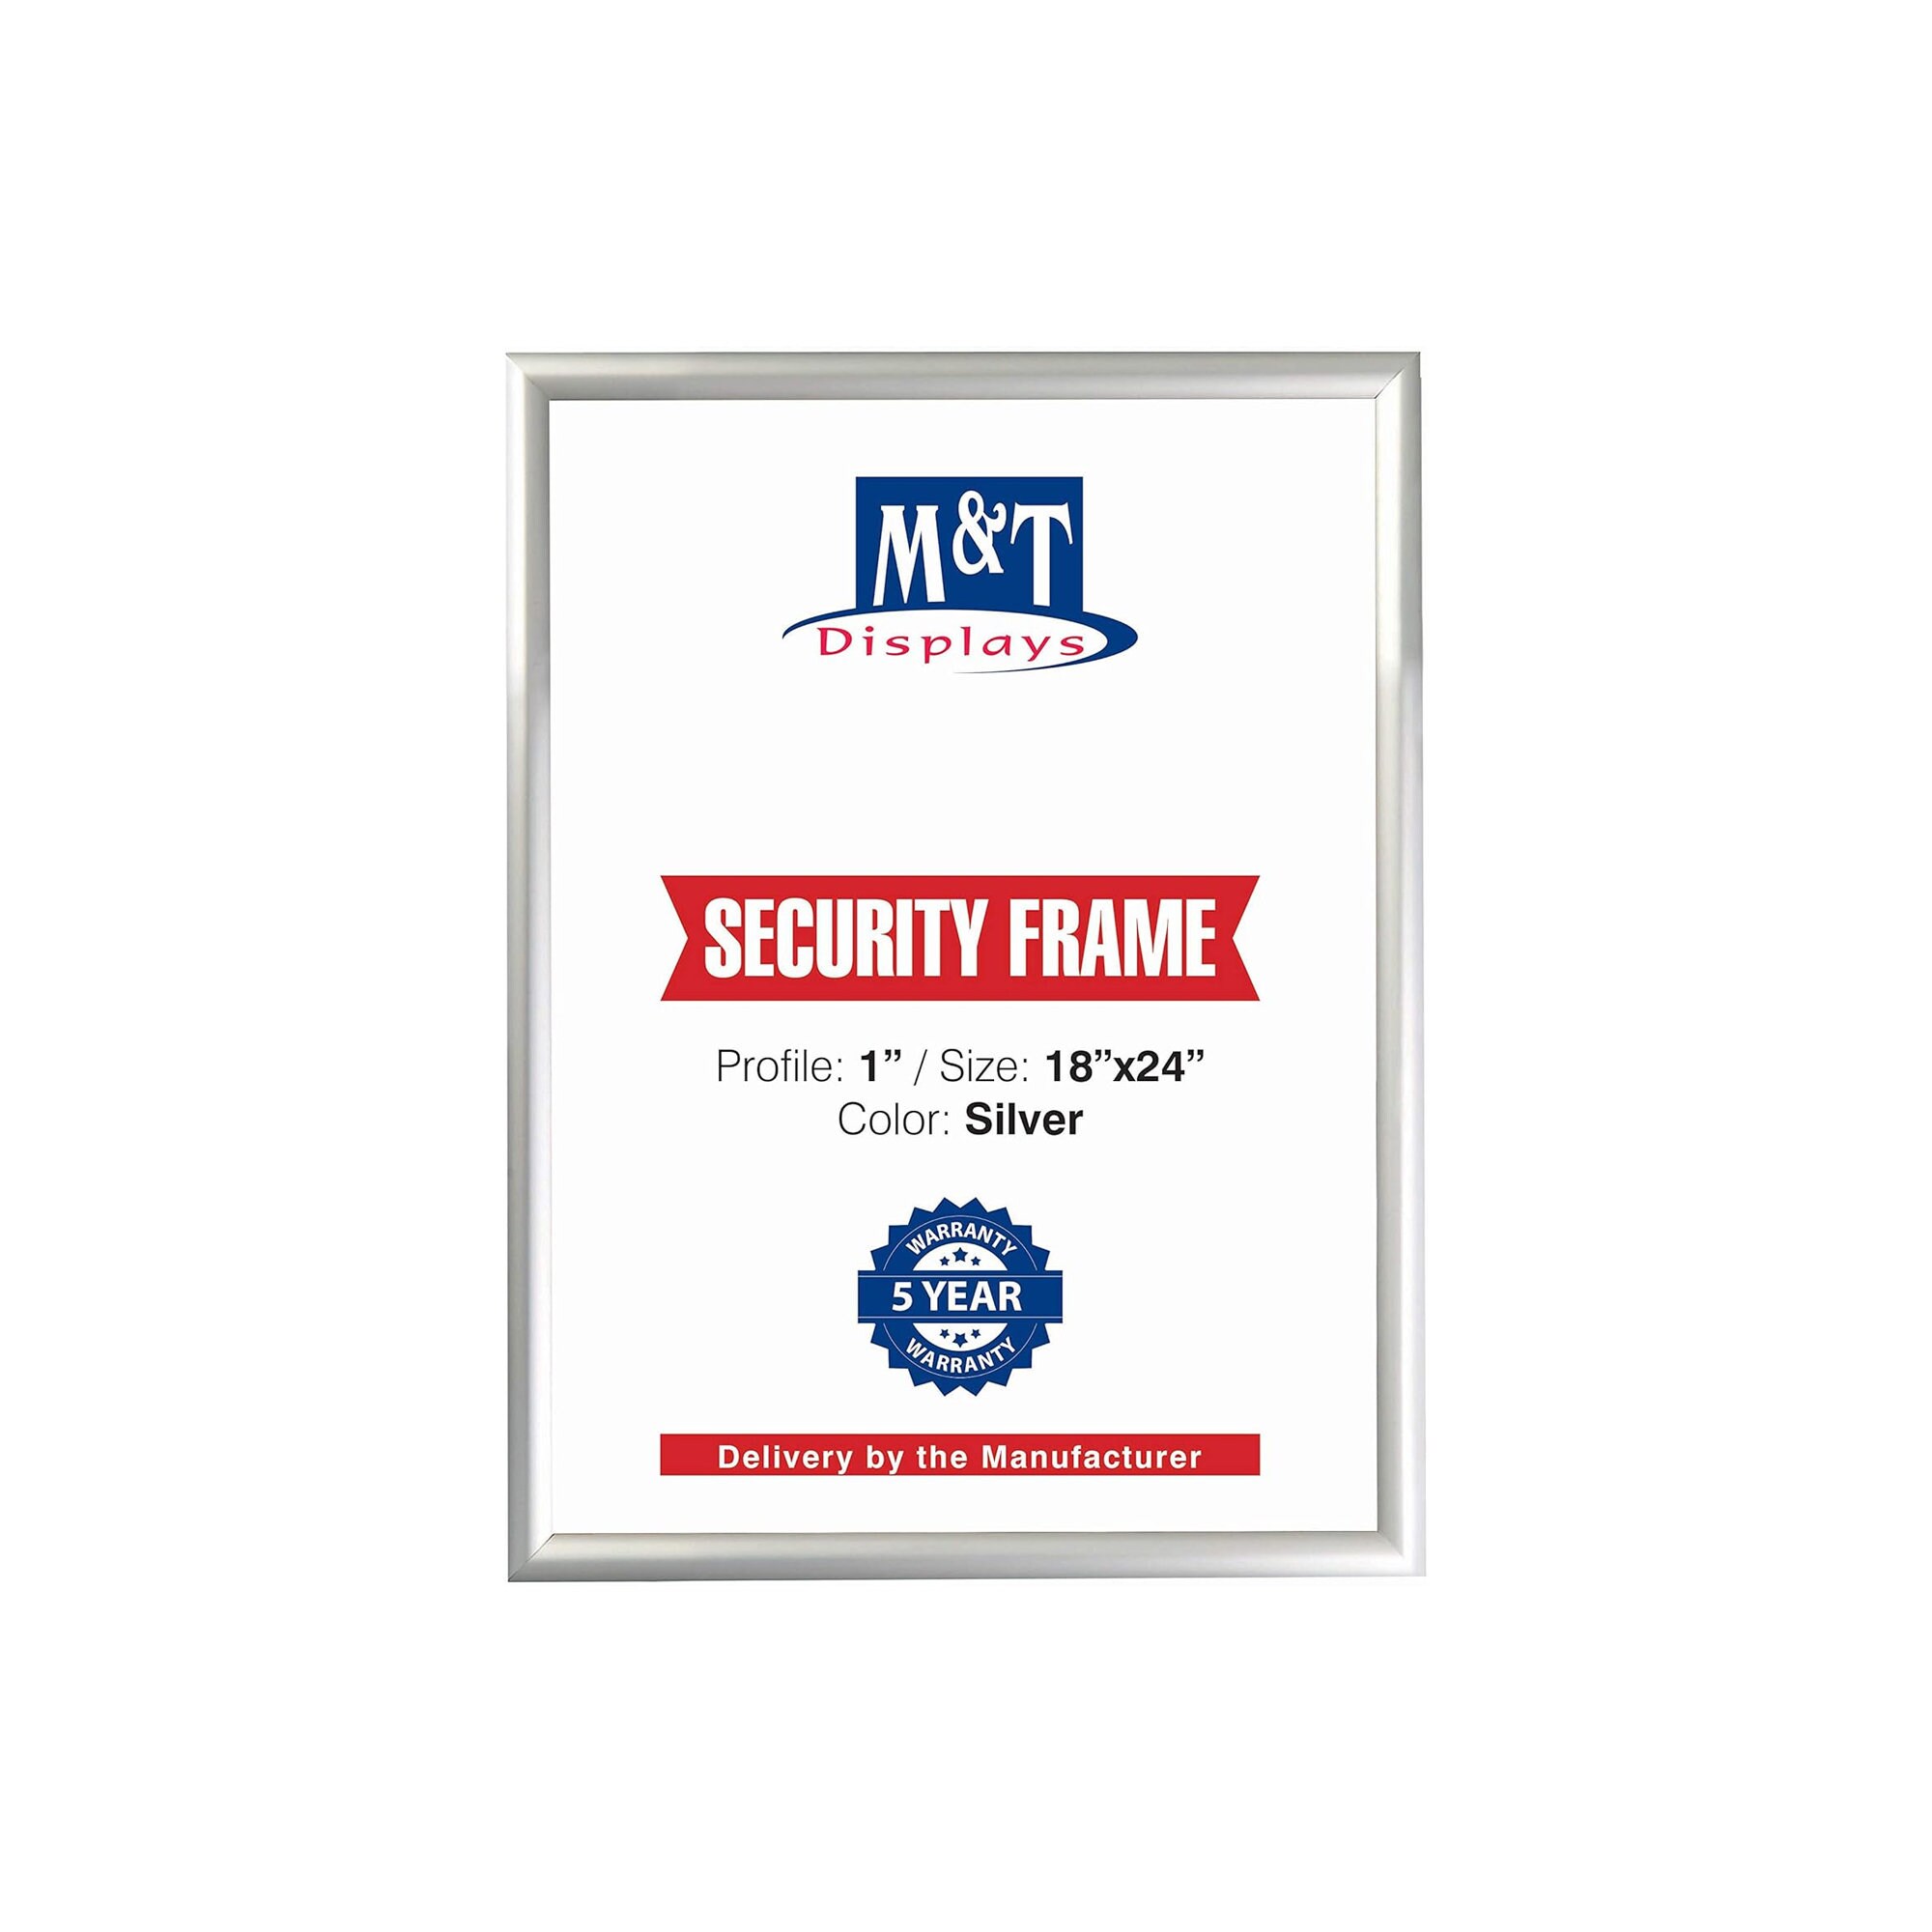 18x24 Lockable Snap Poster Frame - 1.25 inch Silver Mitered Profile